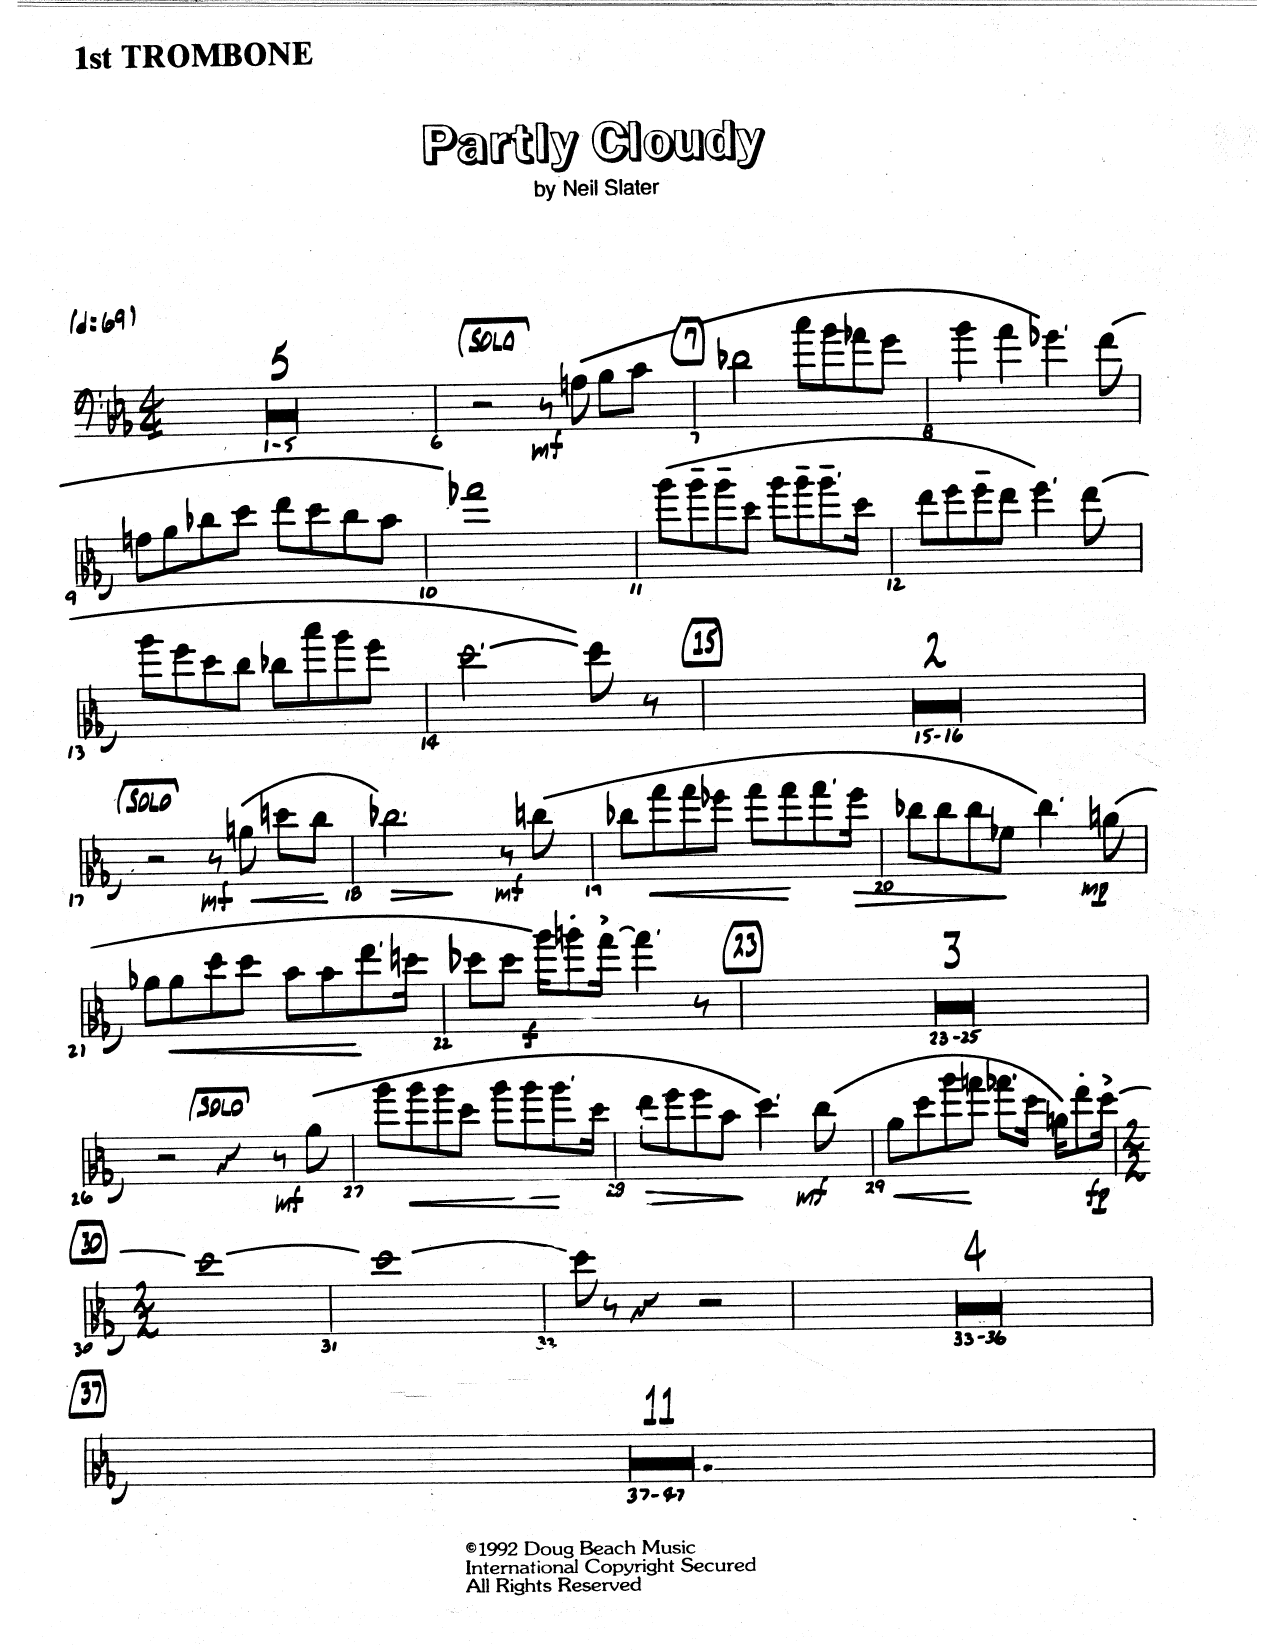 Download Neil Slater Partly Cloudy - 1st Trombone Sheet Music